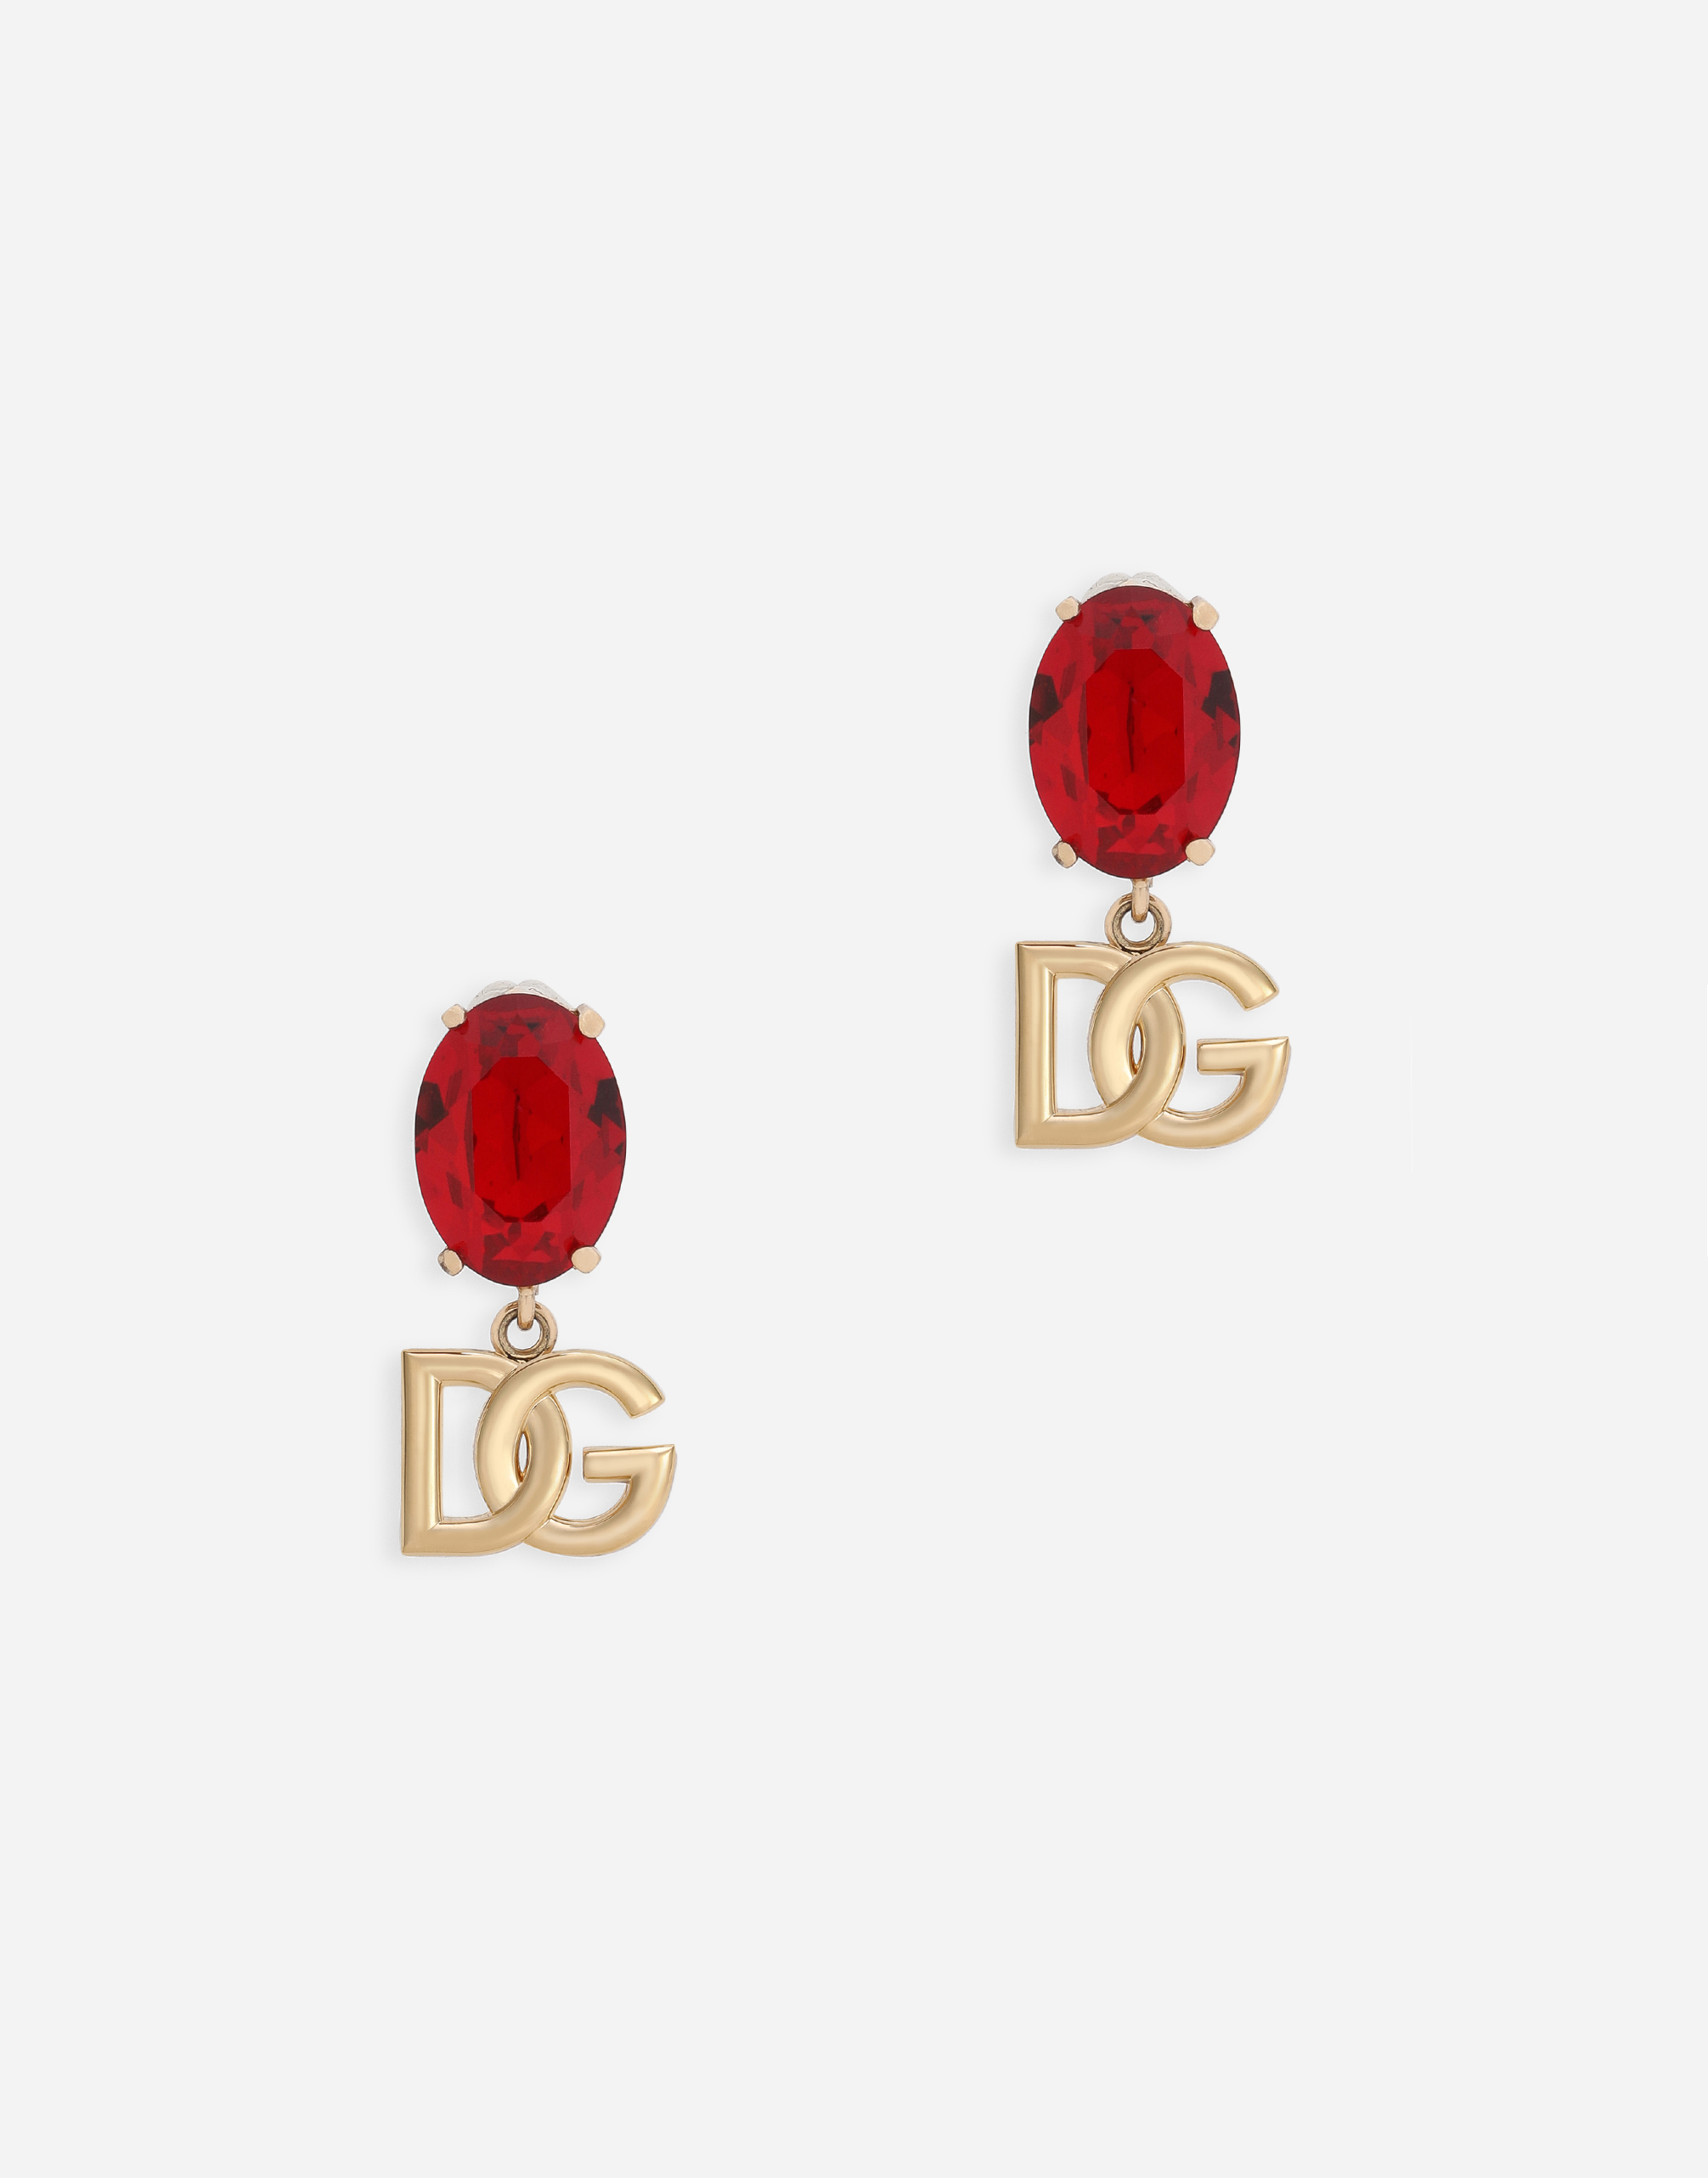 Drop earrings with rhinestones and DG logo in Red